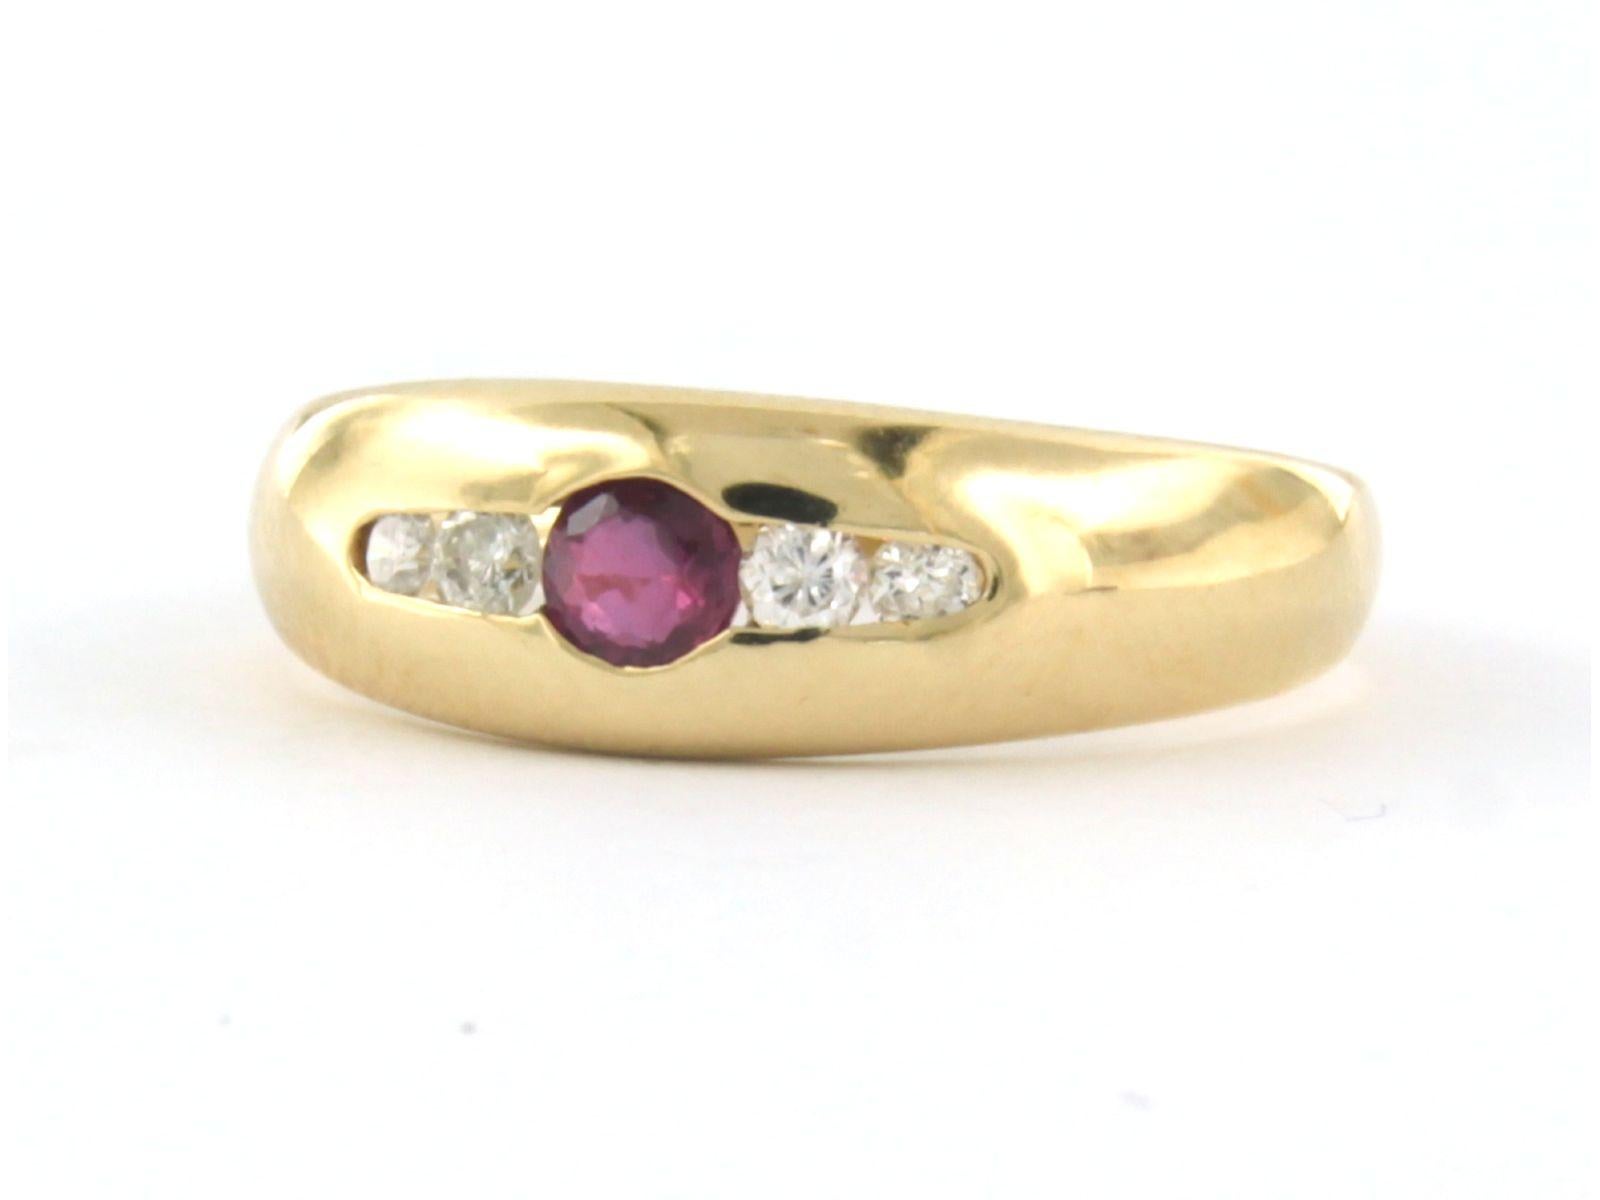 Brilliant Cut Ring with Ruby and diamonds 18k yellow gold